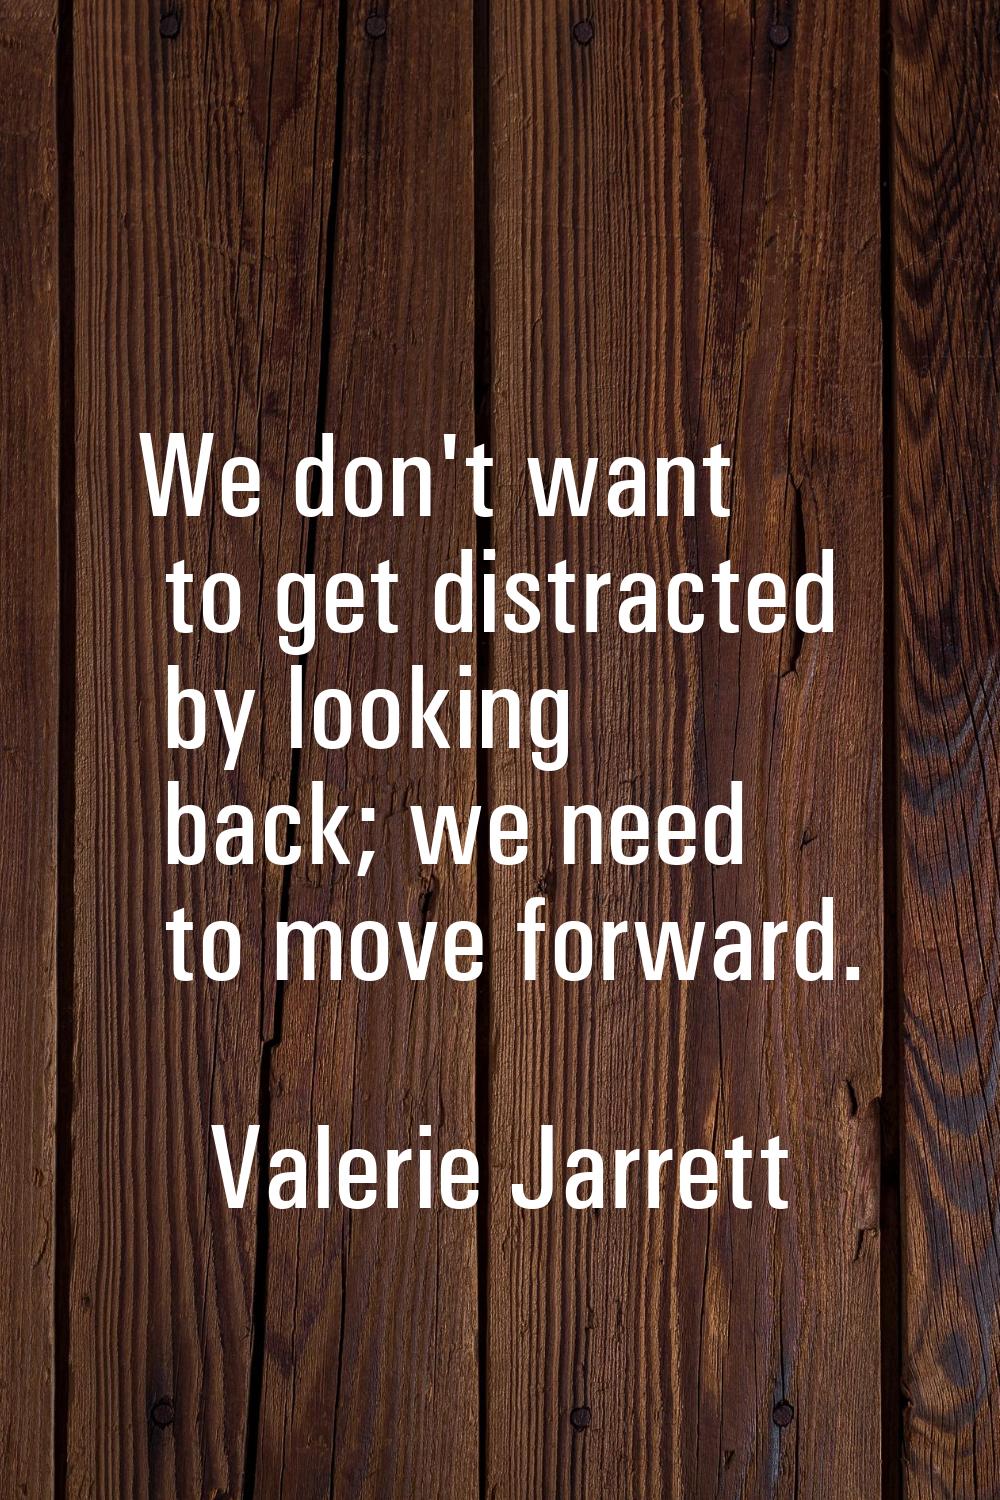 We don't want to get distracted by looking back; we need to move forward.